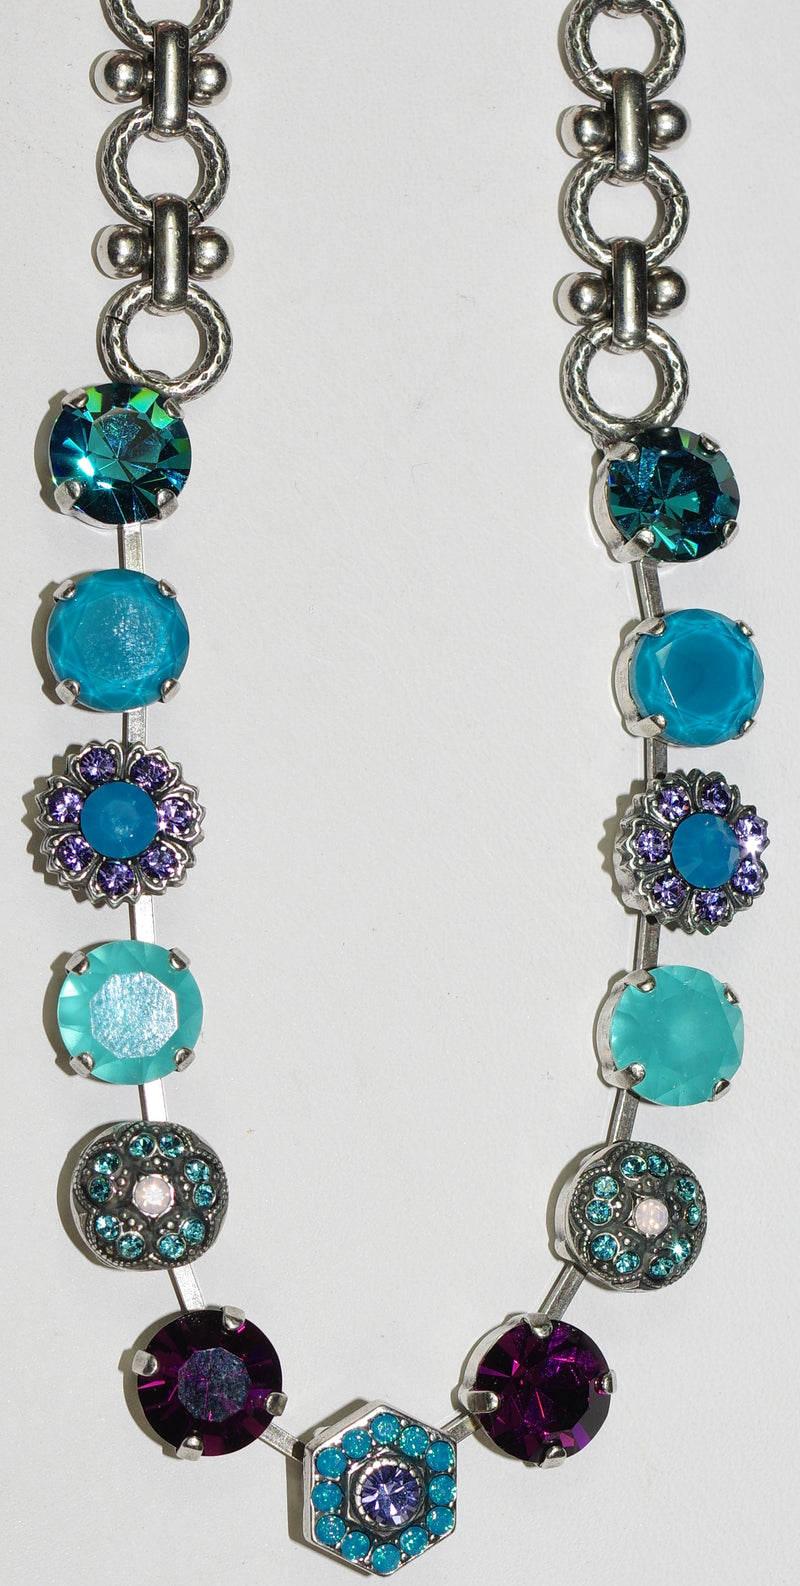 MARIANA NECKLACE PEACOCK: purple, teal 3/8" stones in silver setting, 18" adjustable chain